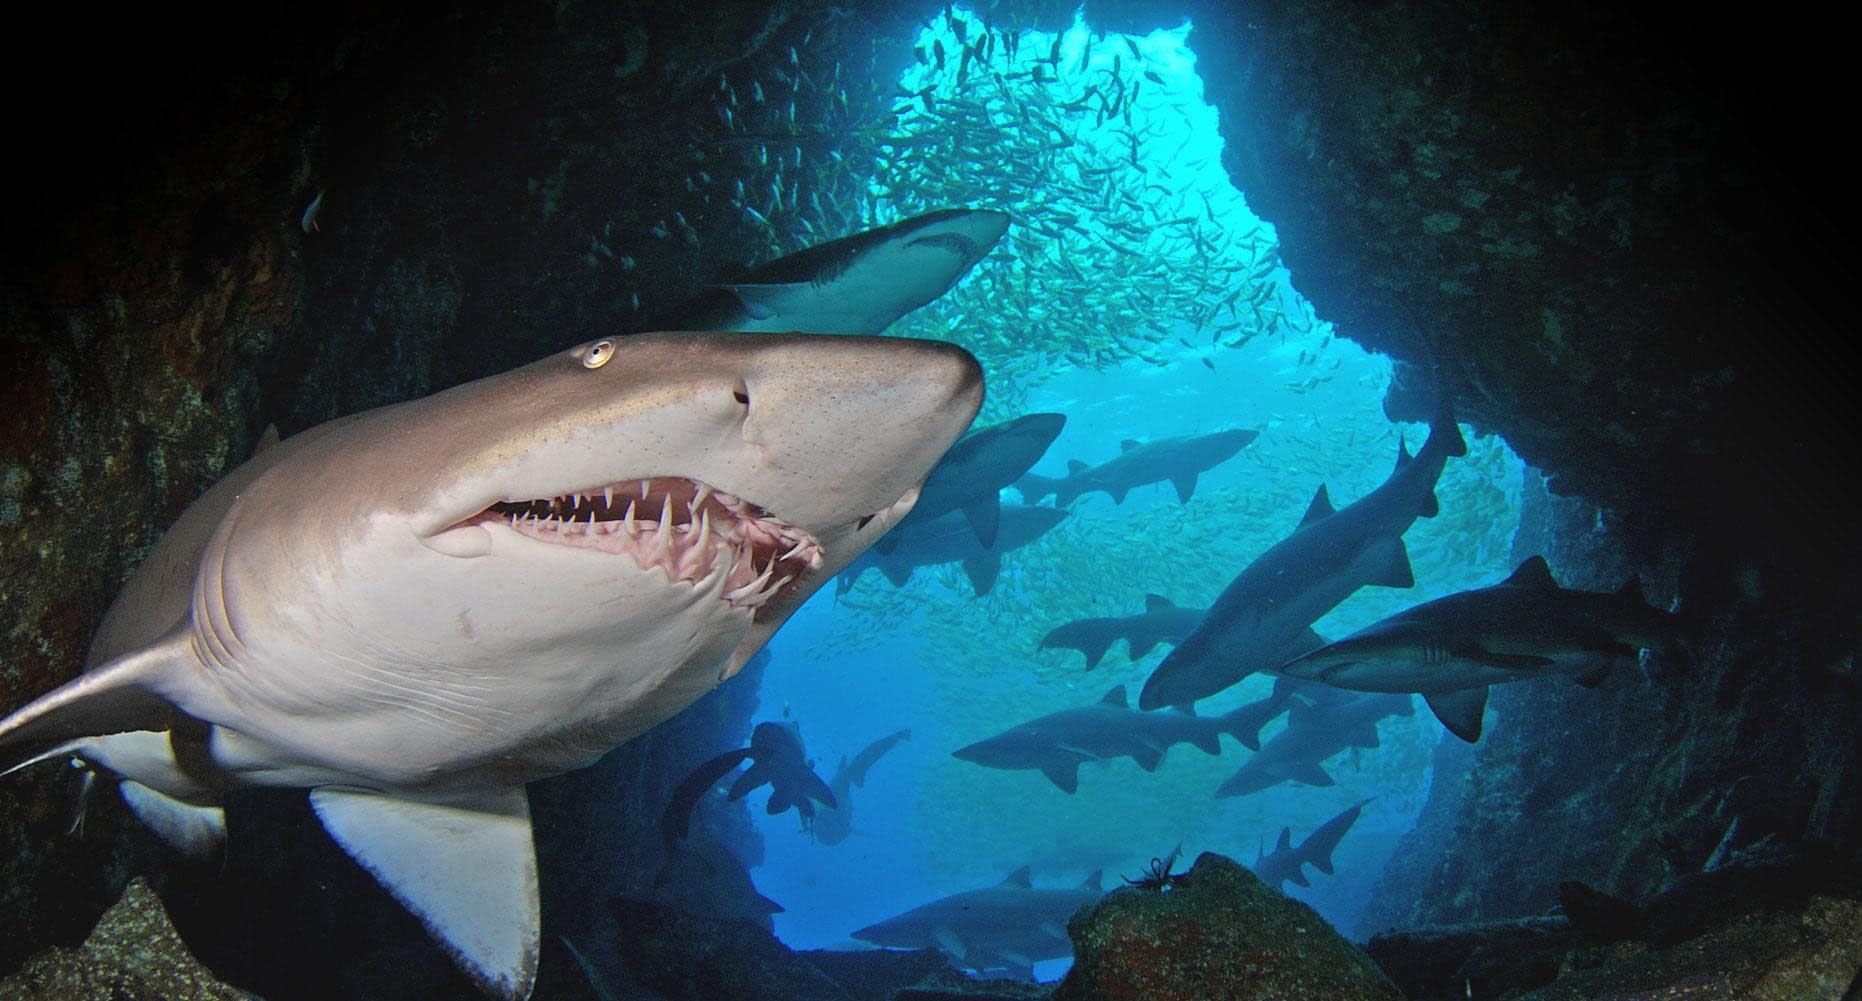 A sand tiger shark, fearsome-looking but harmless to people